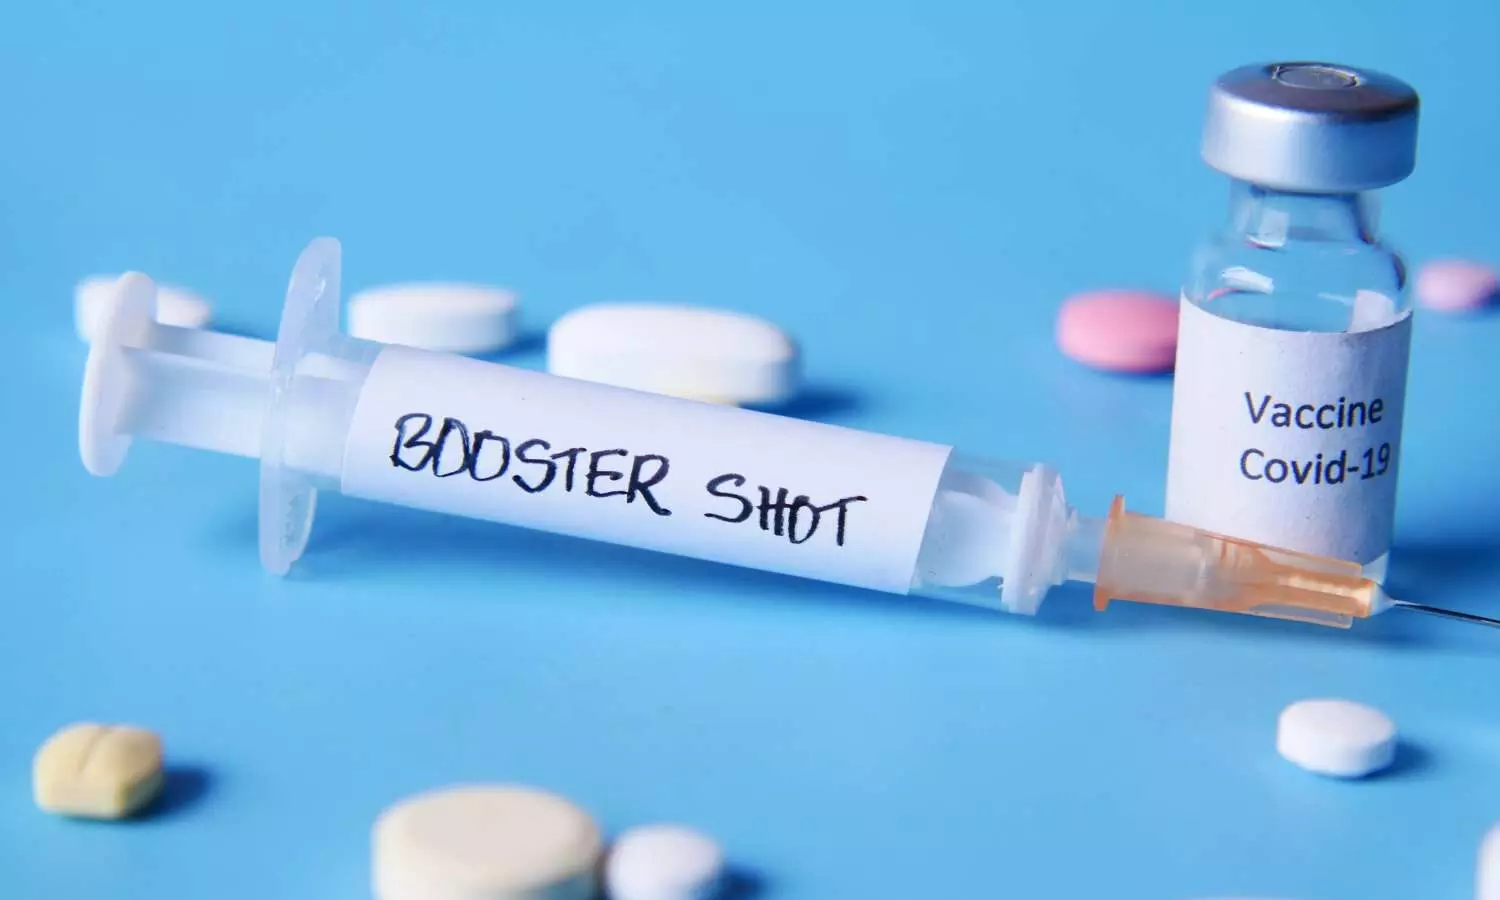 90% reduction in COVID-19 deaths after booster dose: Hong Kong study